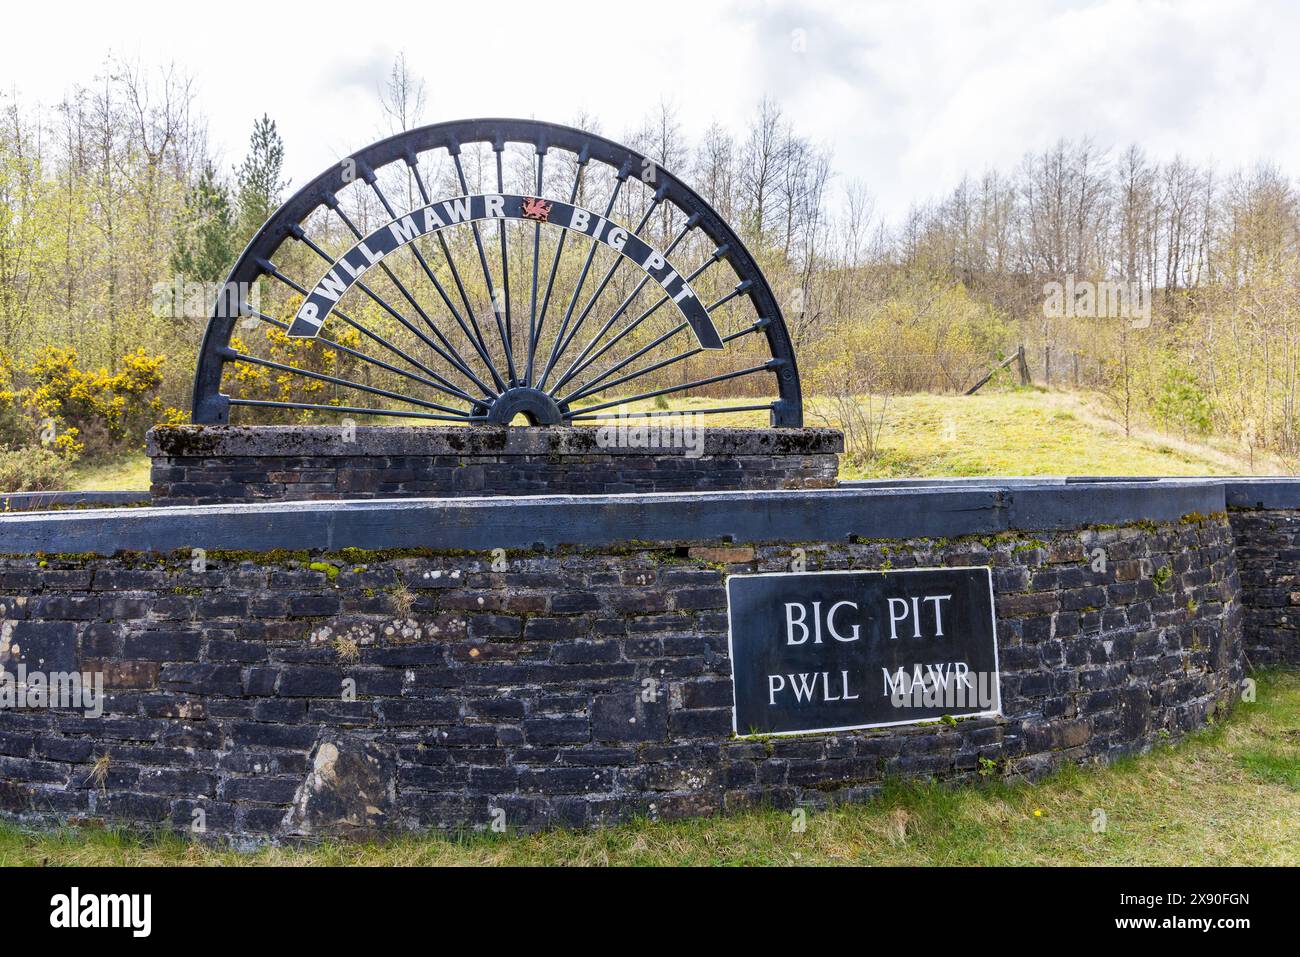 Sign at entrance to Big Pit, Pwll Mawr, coal mine museum, Blaenavon, Wales, UK Stock Photo